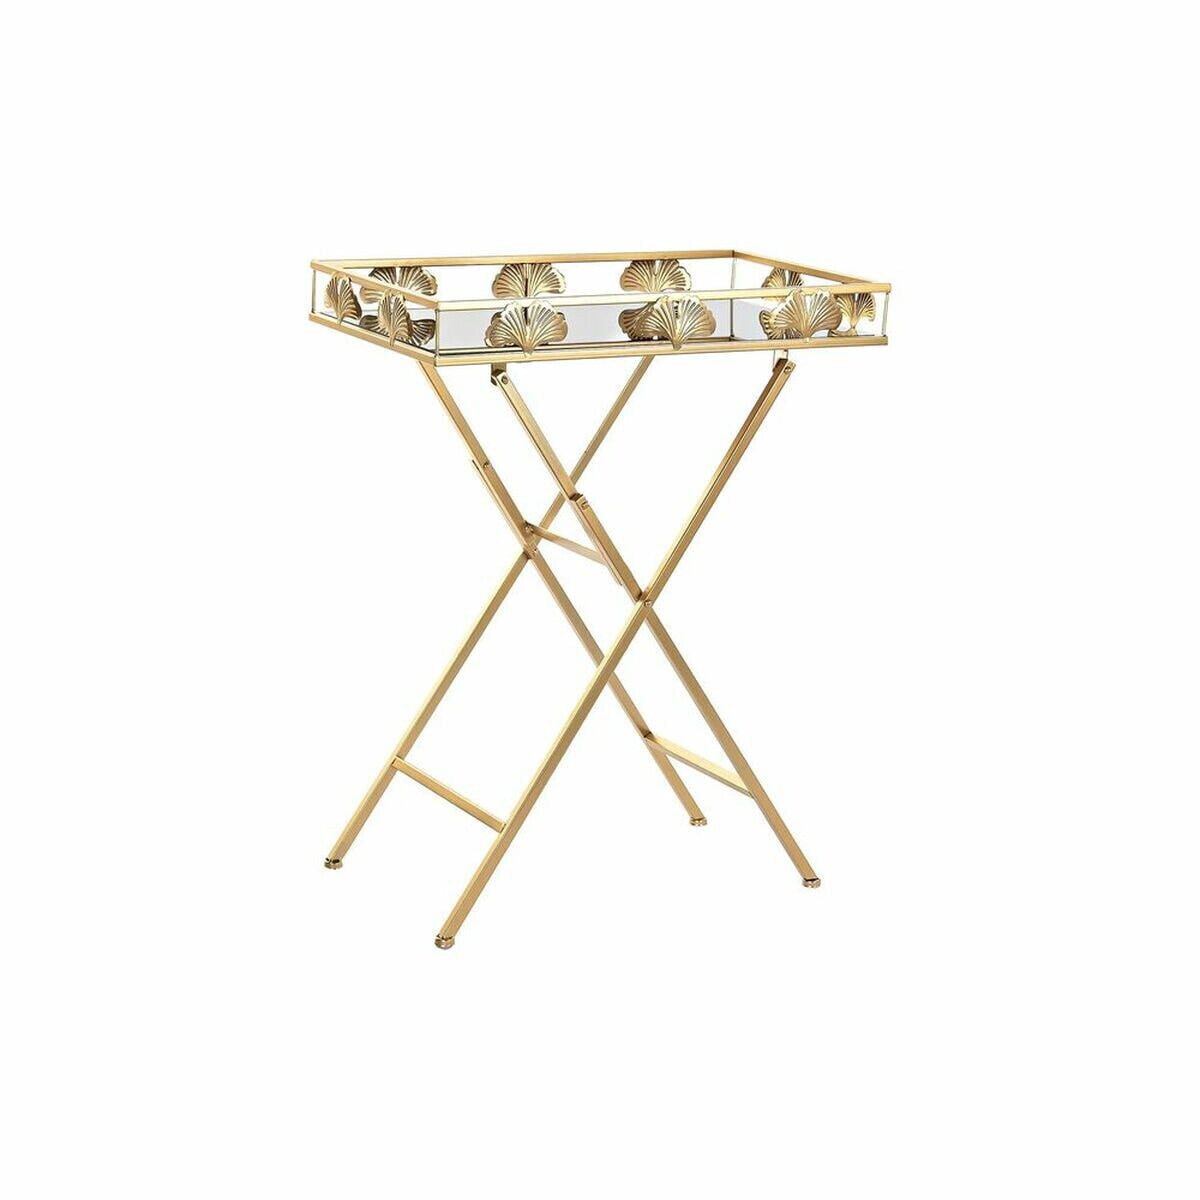 Side table DKD Home Decor Crystal Golden Metal Tropical Leaf of a plant (56 x 36 x 71 cm)